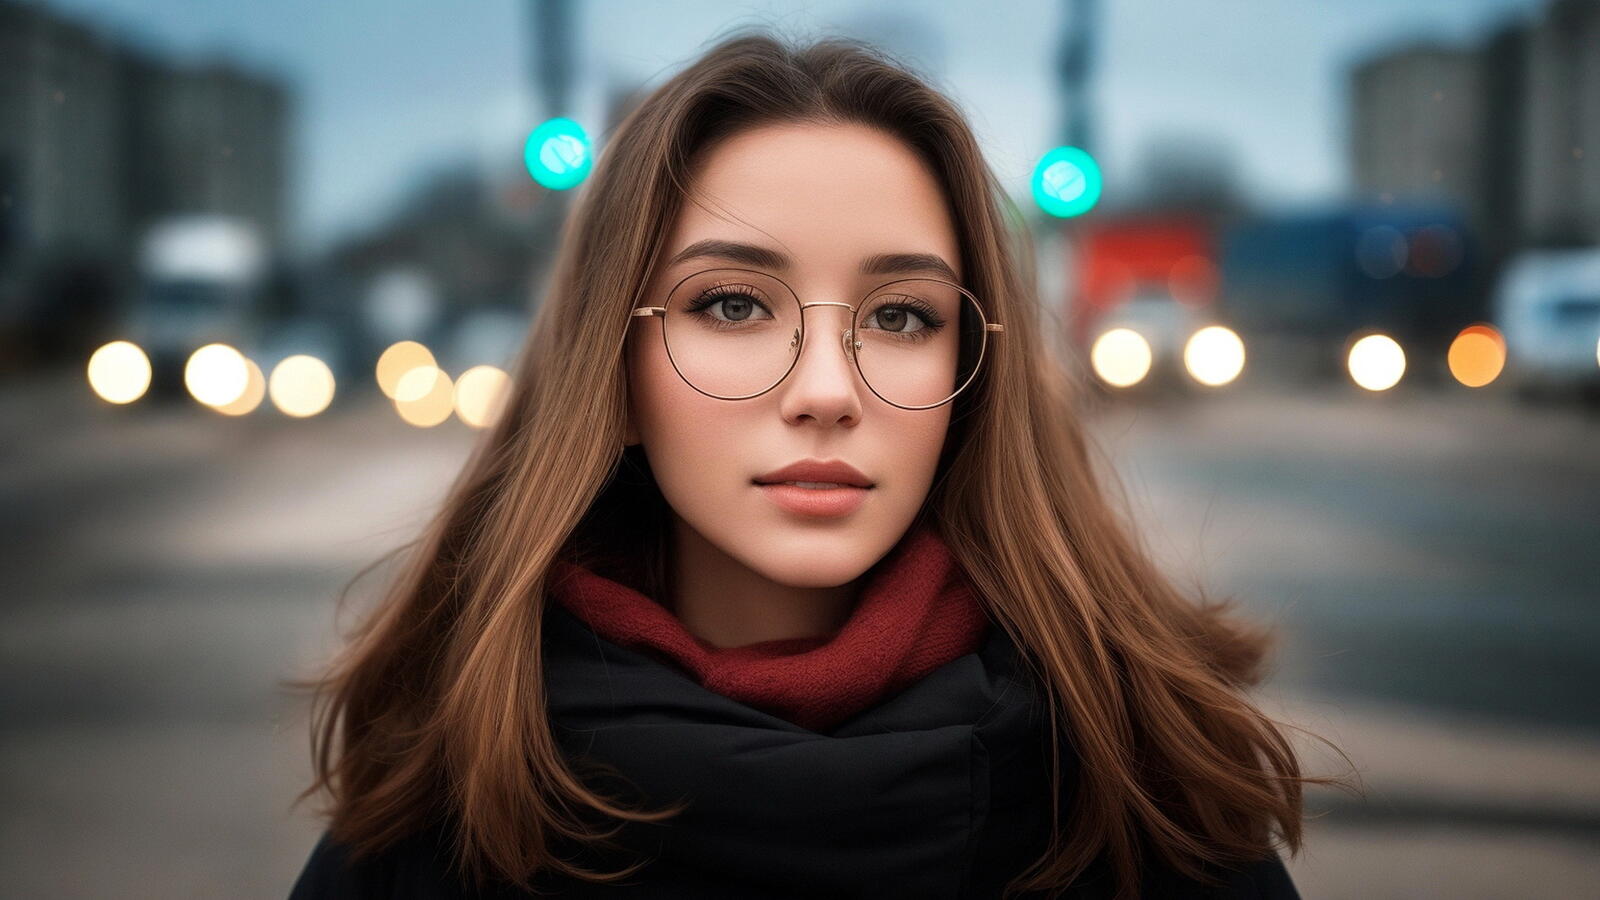 Free photo The girl with the glasses and the city